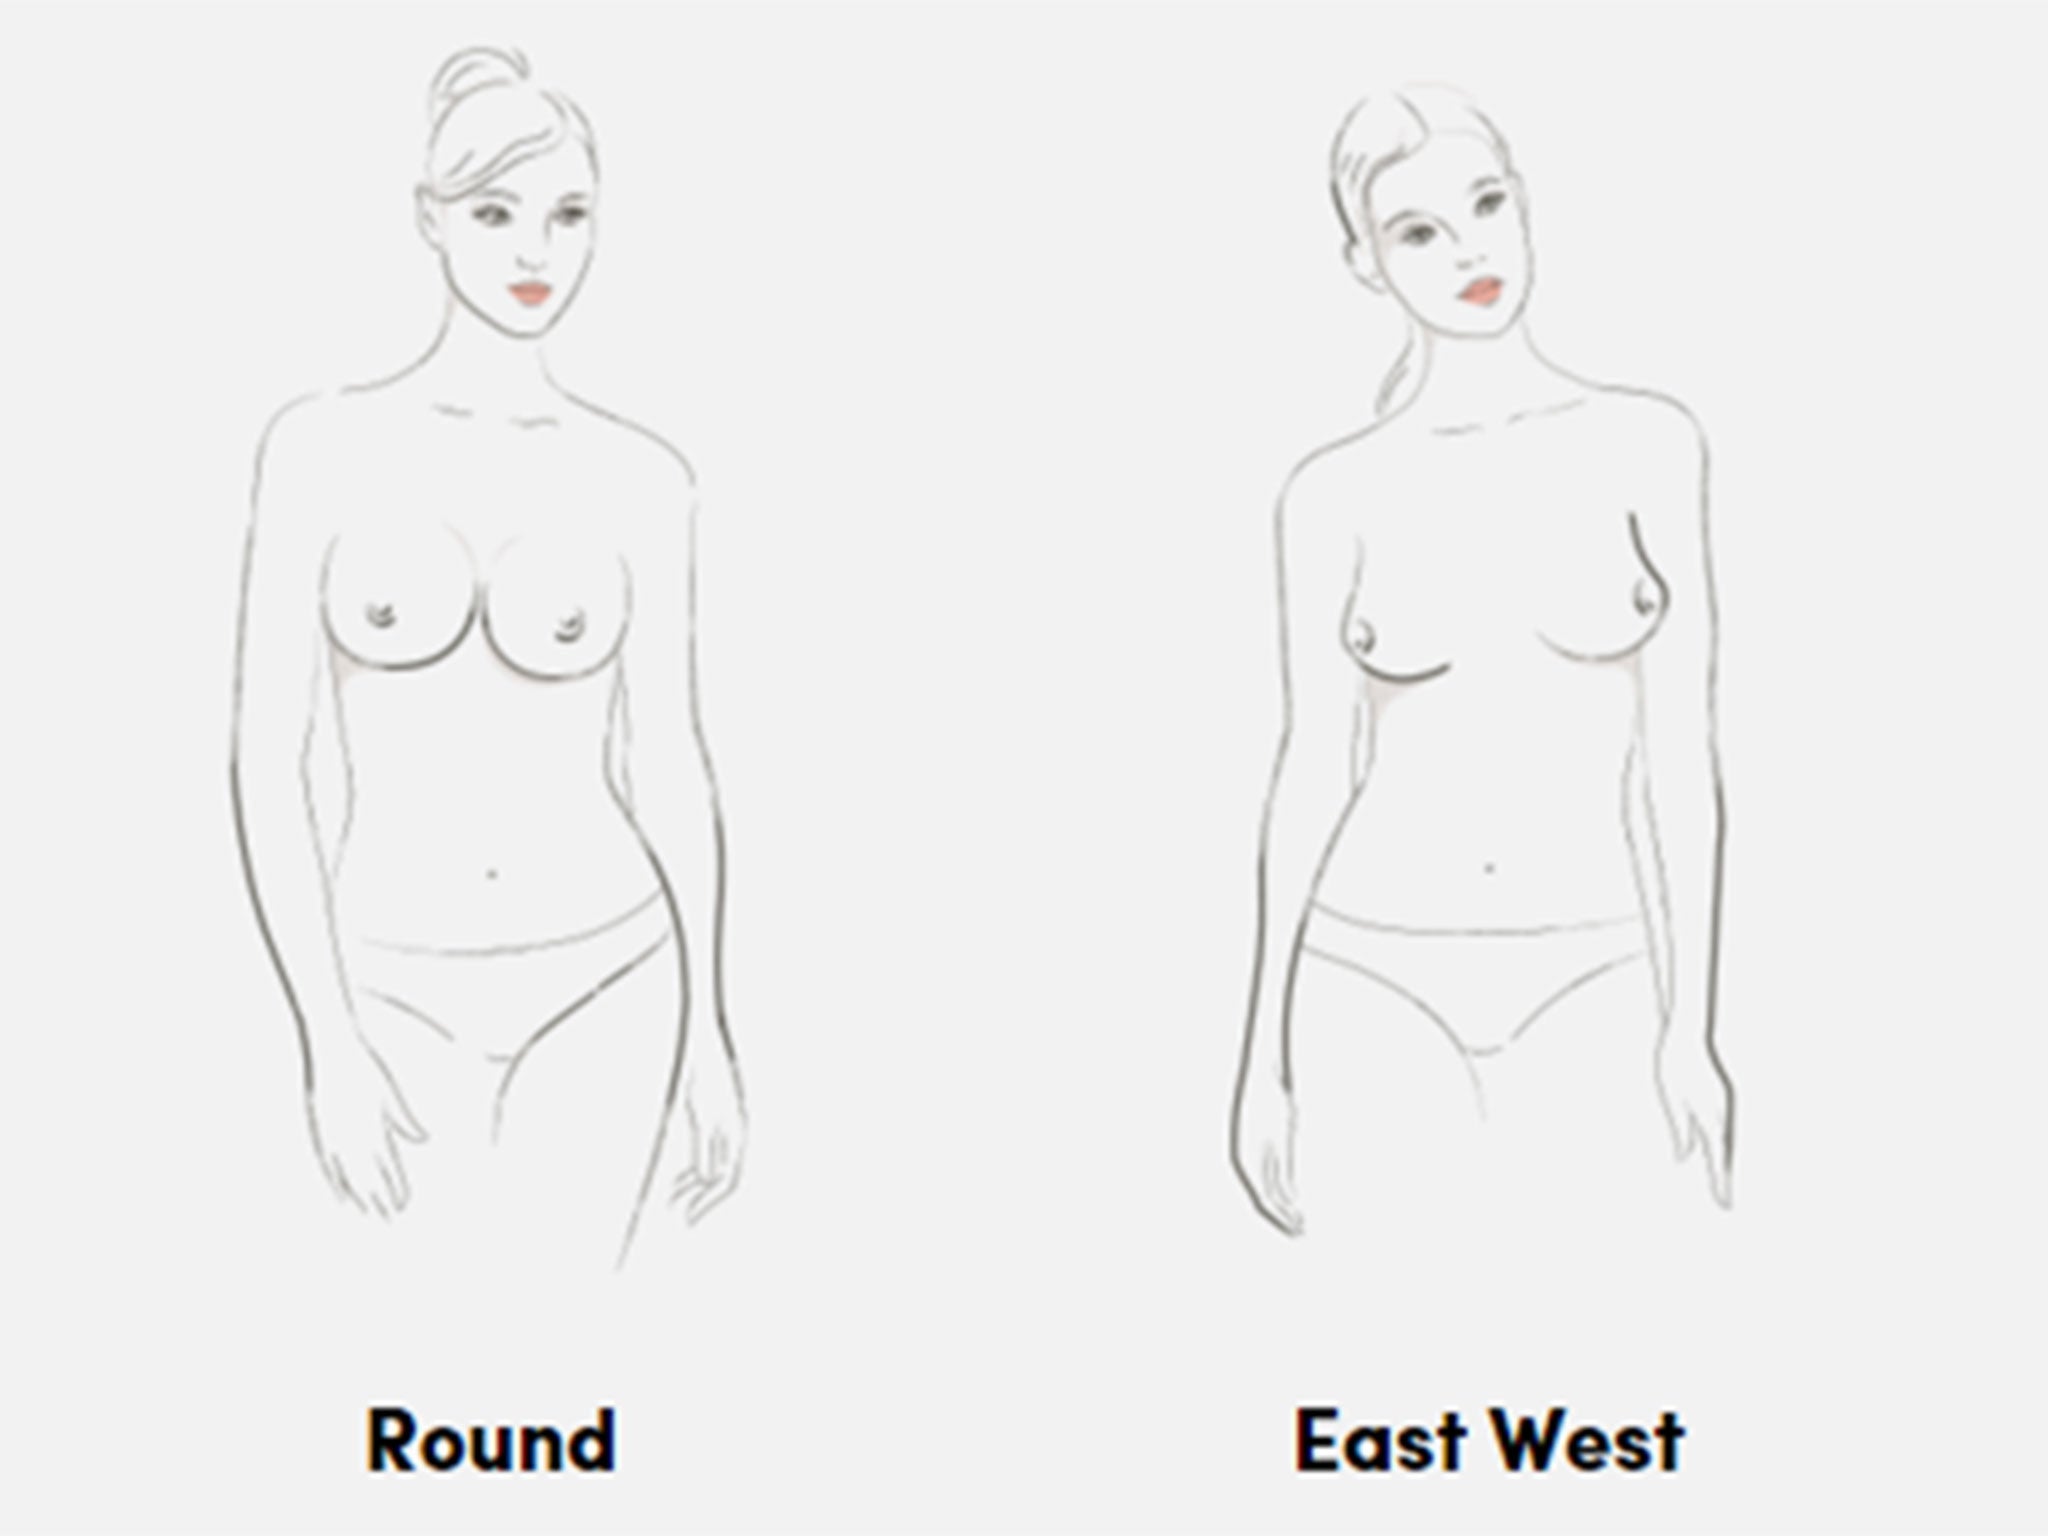 Different types of boobs and nipples